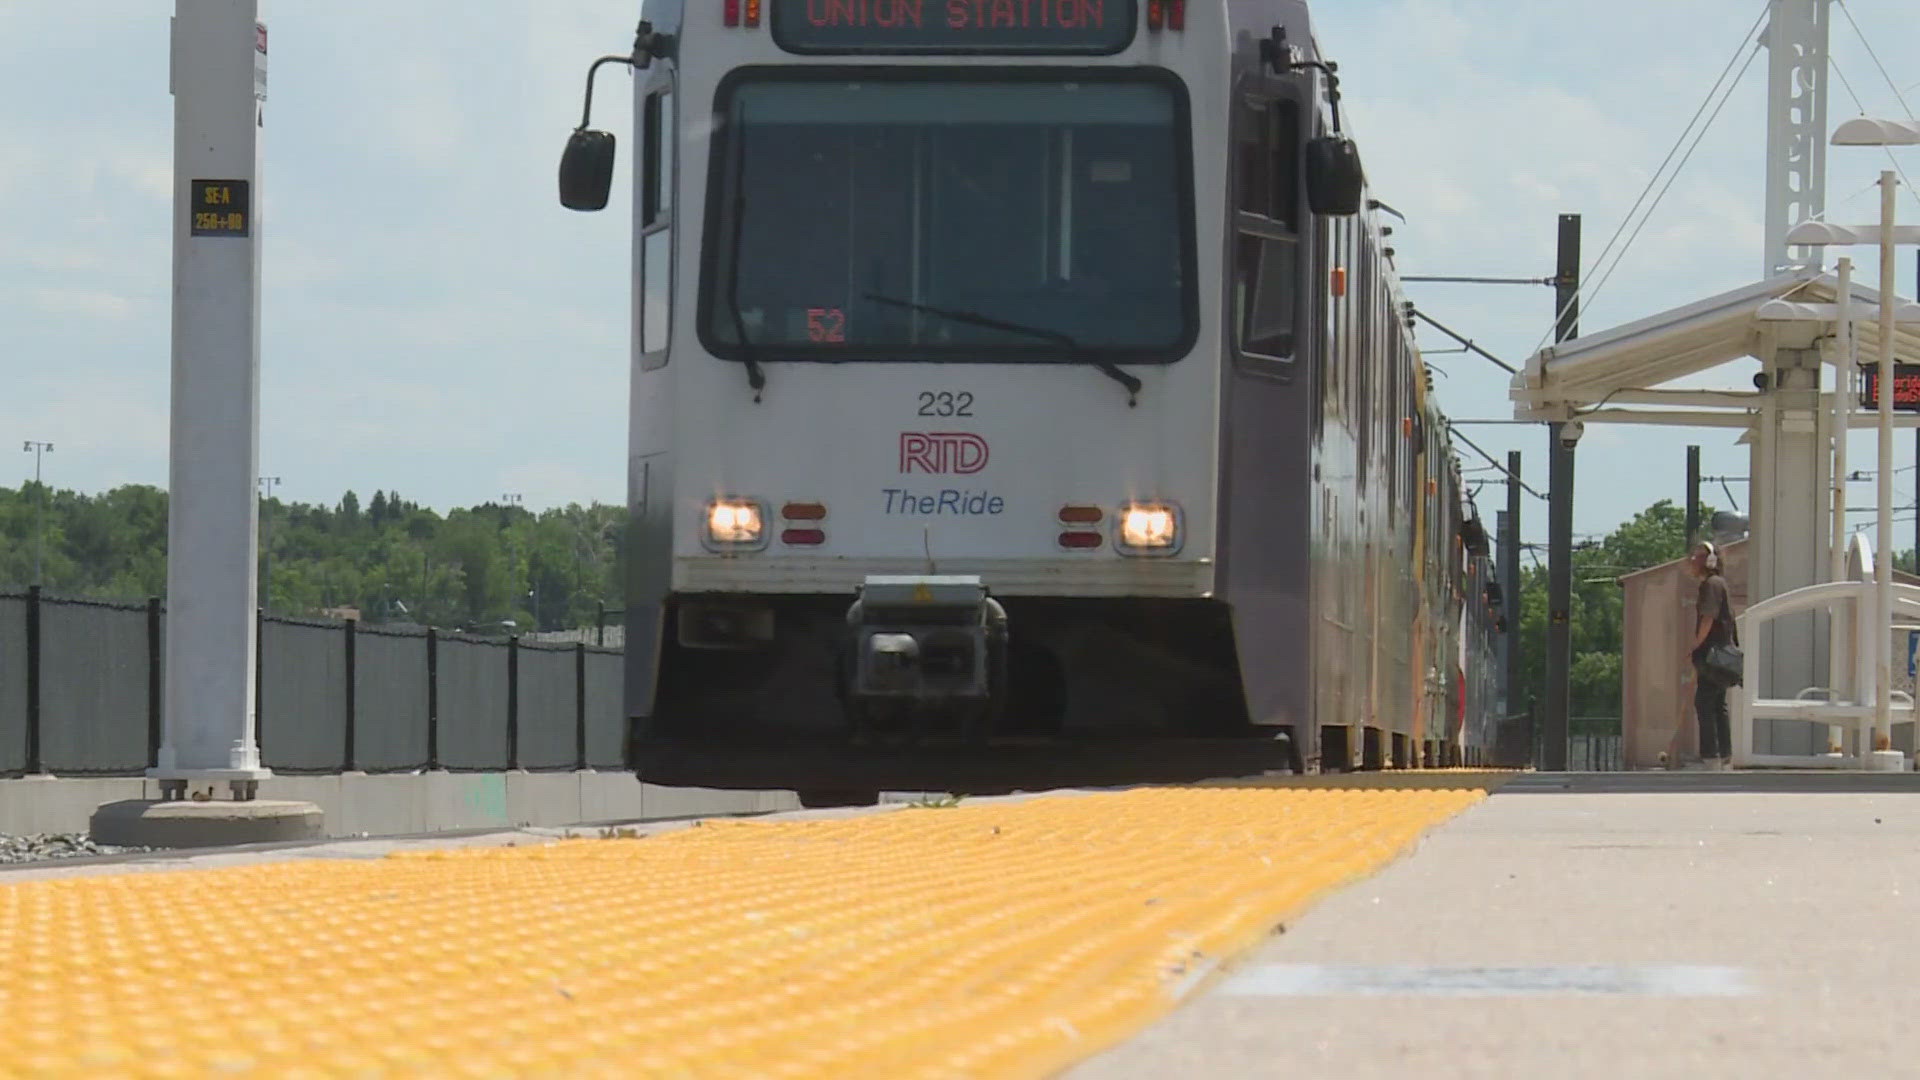 RTD slowed down the light rail along I-25 due to rail damage discovered from inspections.